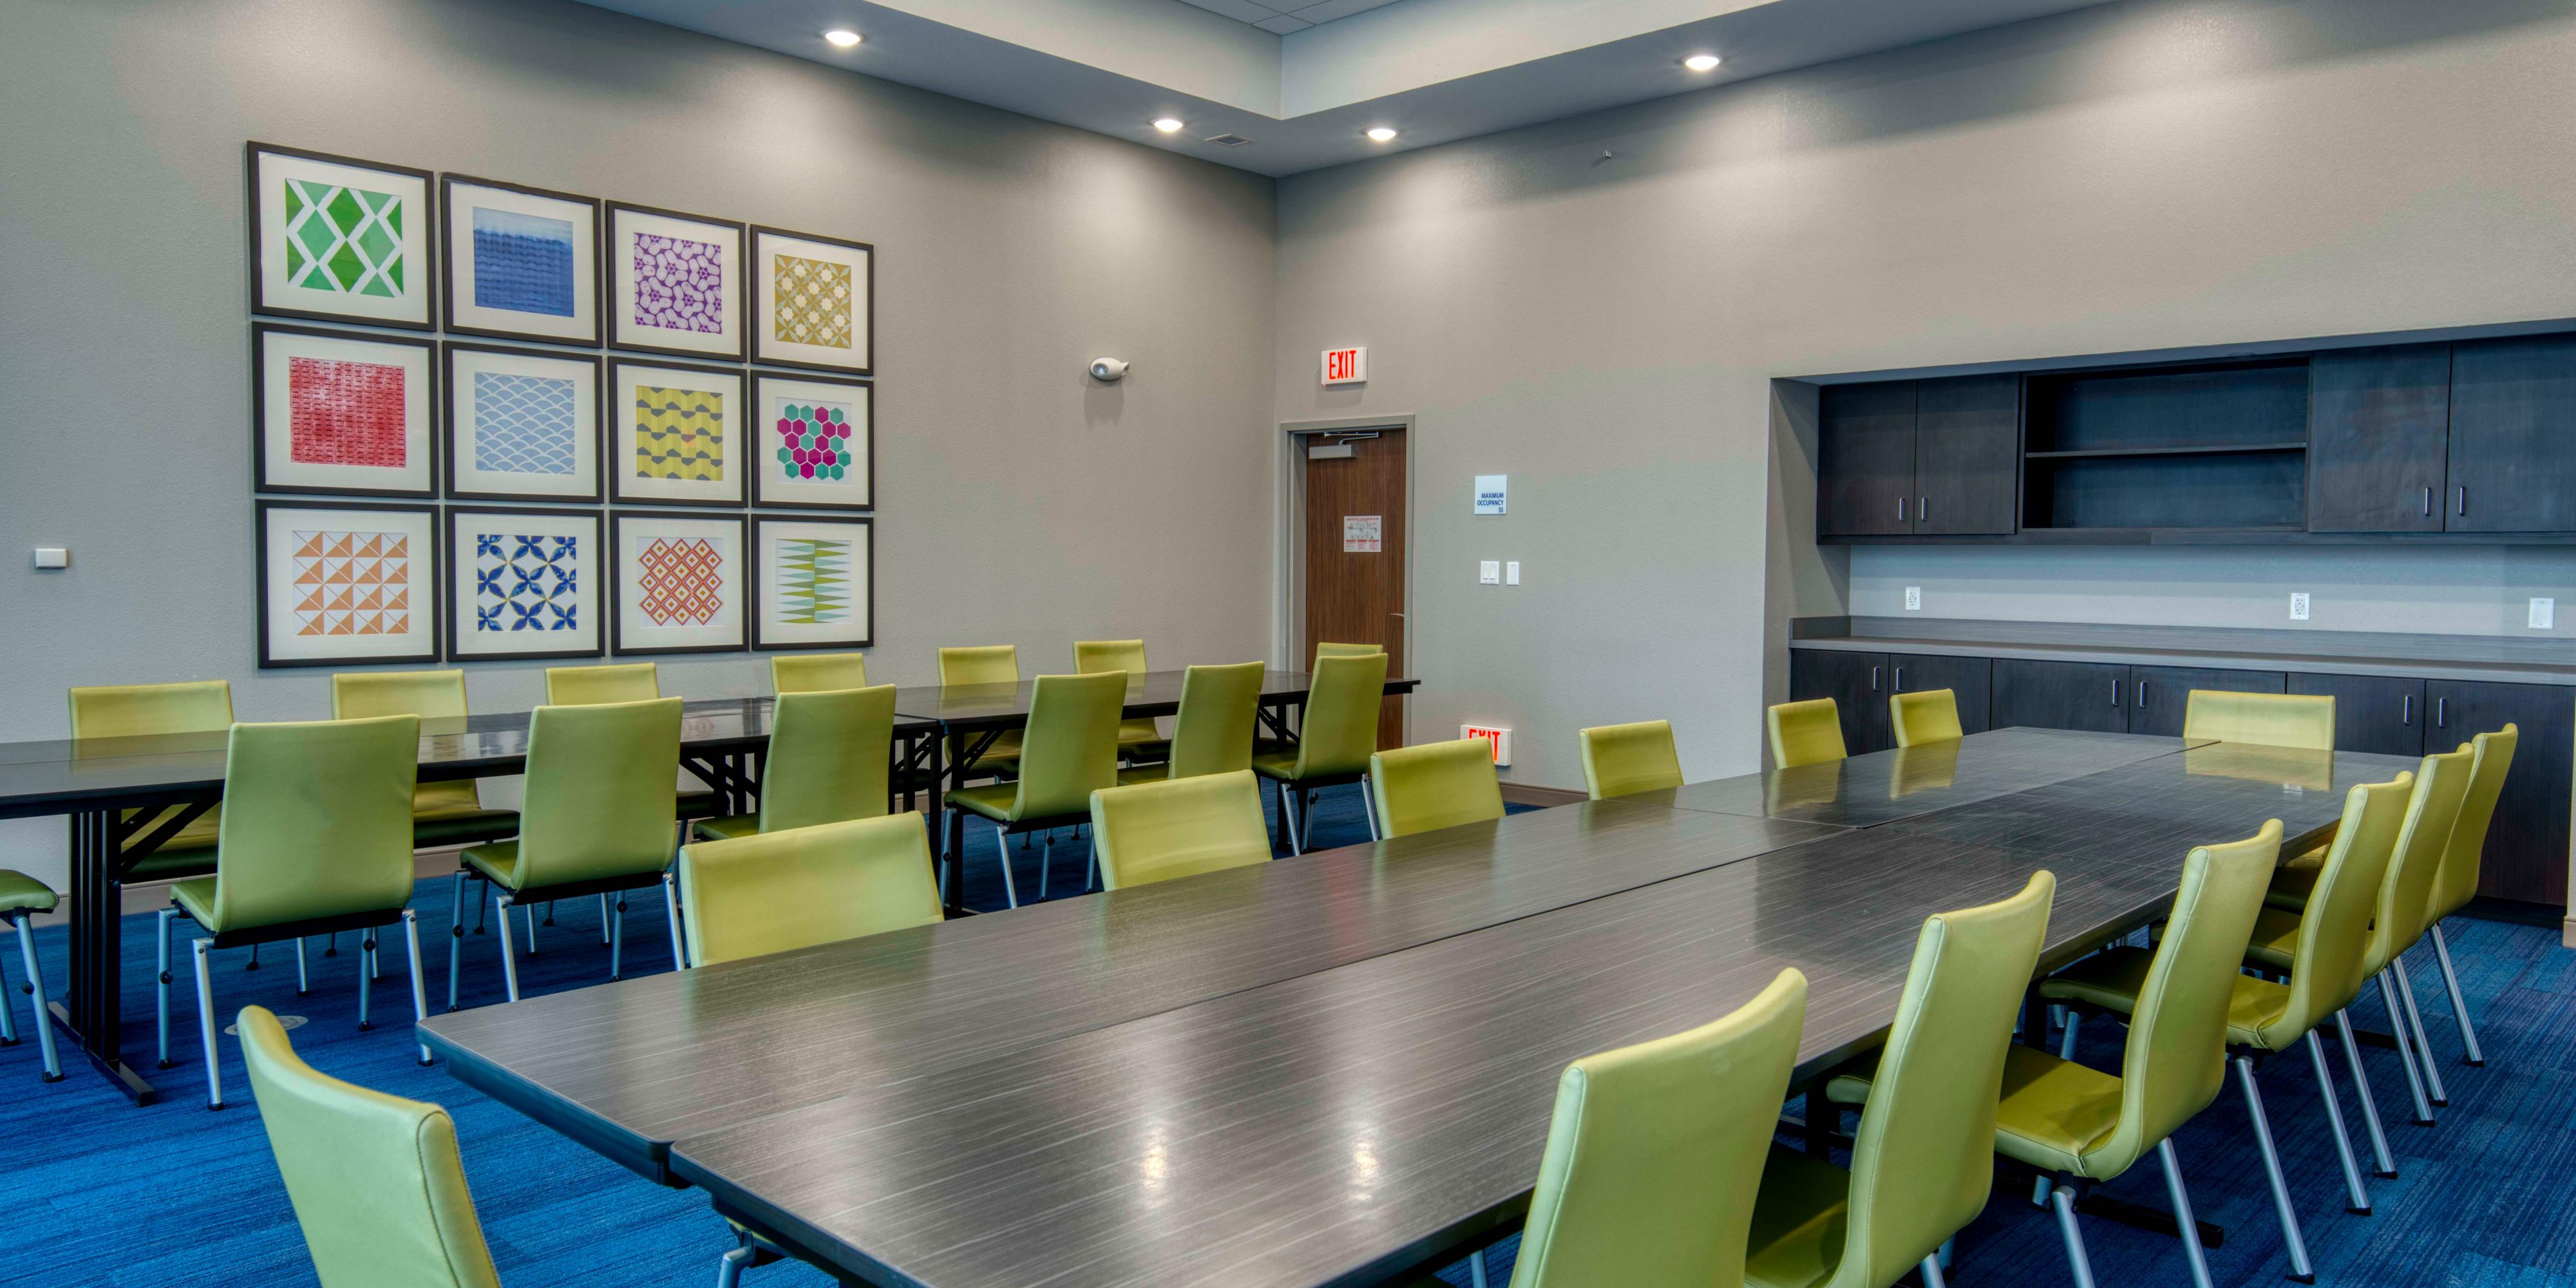 Small meetings play a vital role in the success of many organizations. Are you planning a small corporate meeting, training, board retreat or brainstorming session? Our flexible meeting space is sure to lead to big ideas! Whether you're a group of 5 or 50, we can help! Our Director of Sales is dedicated to making your meeting a huge success!